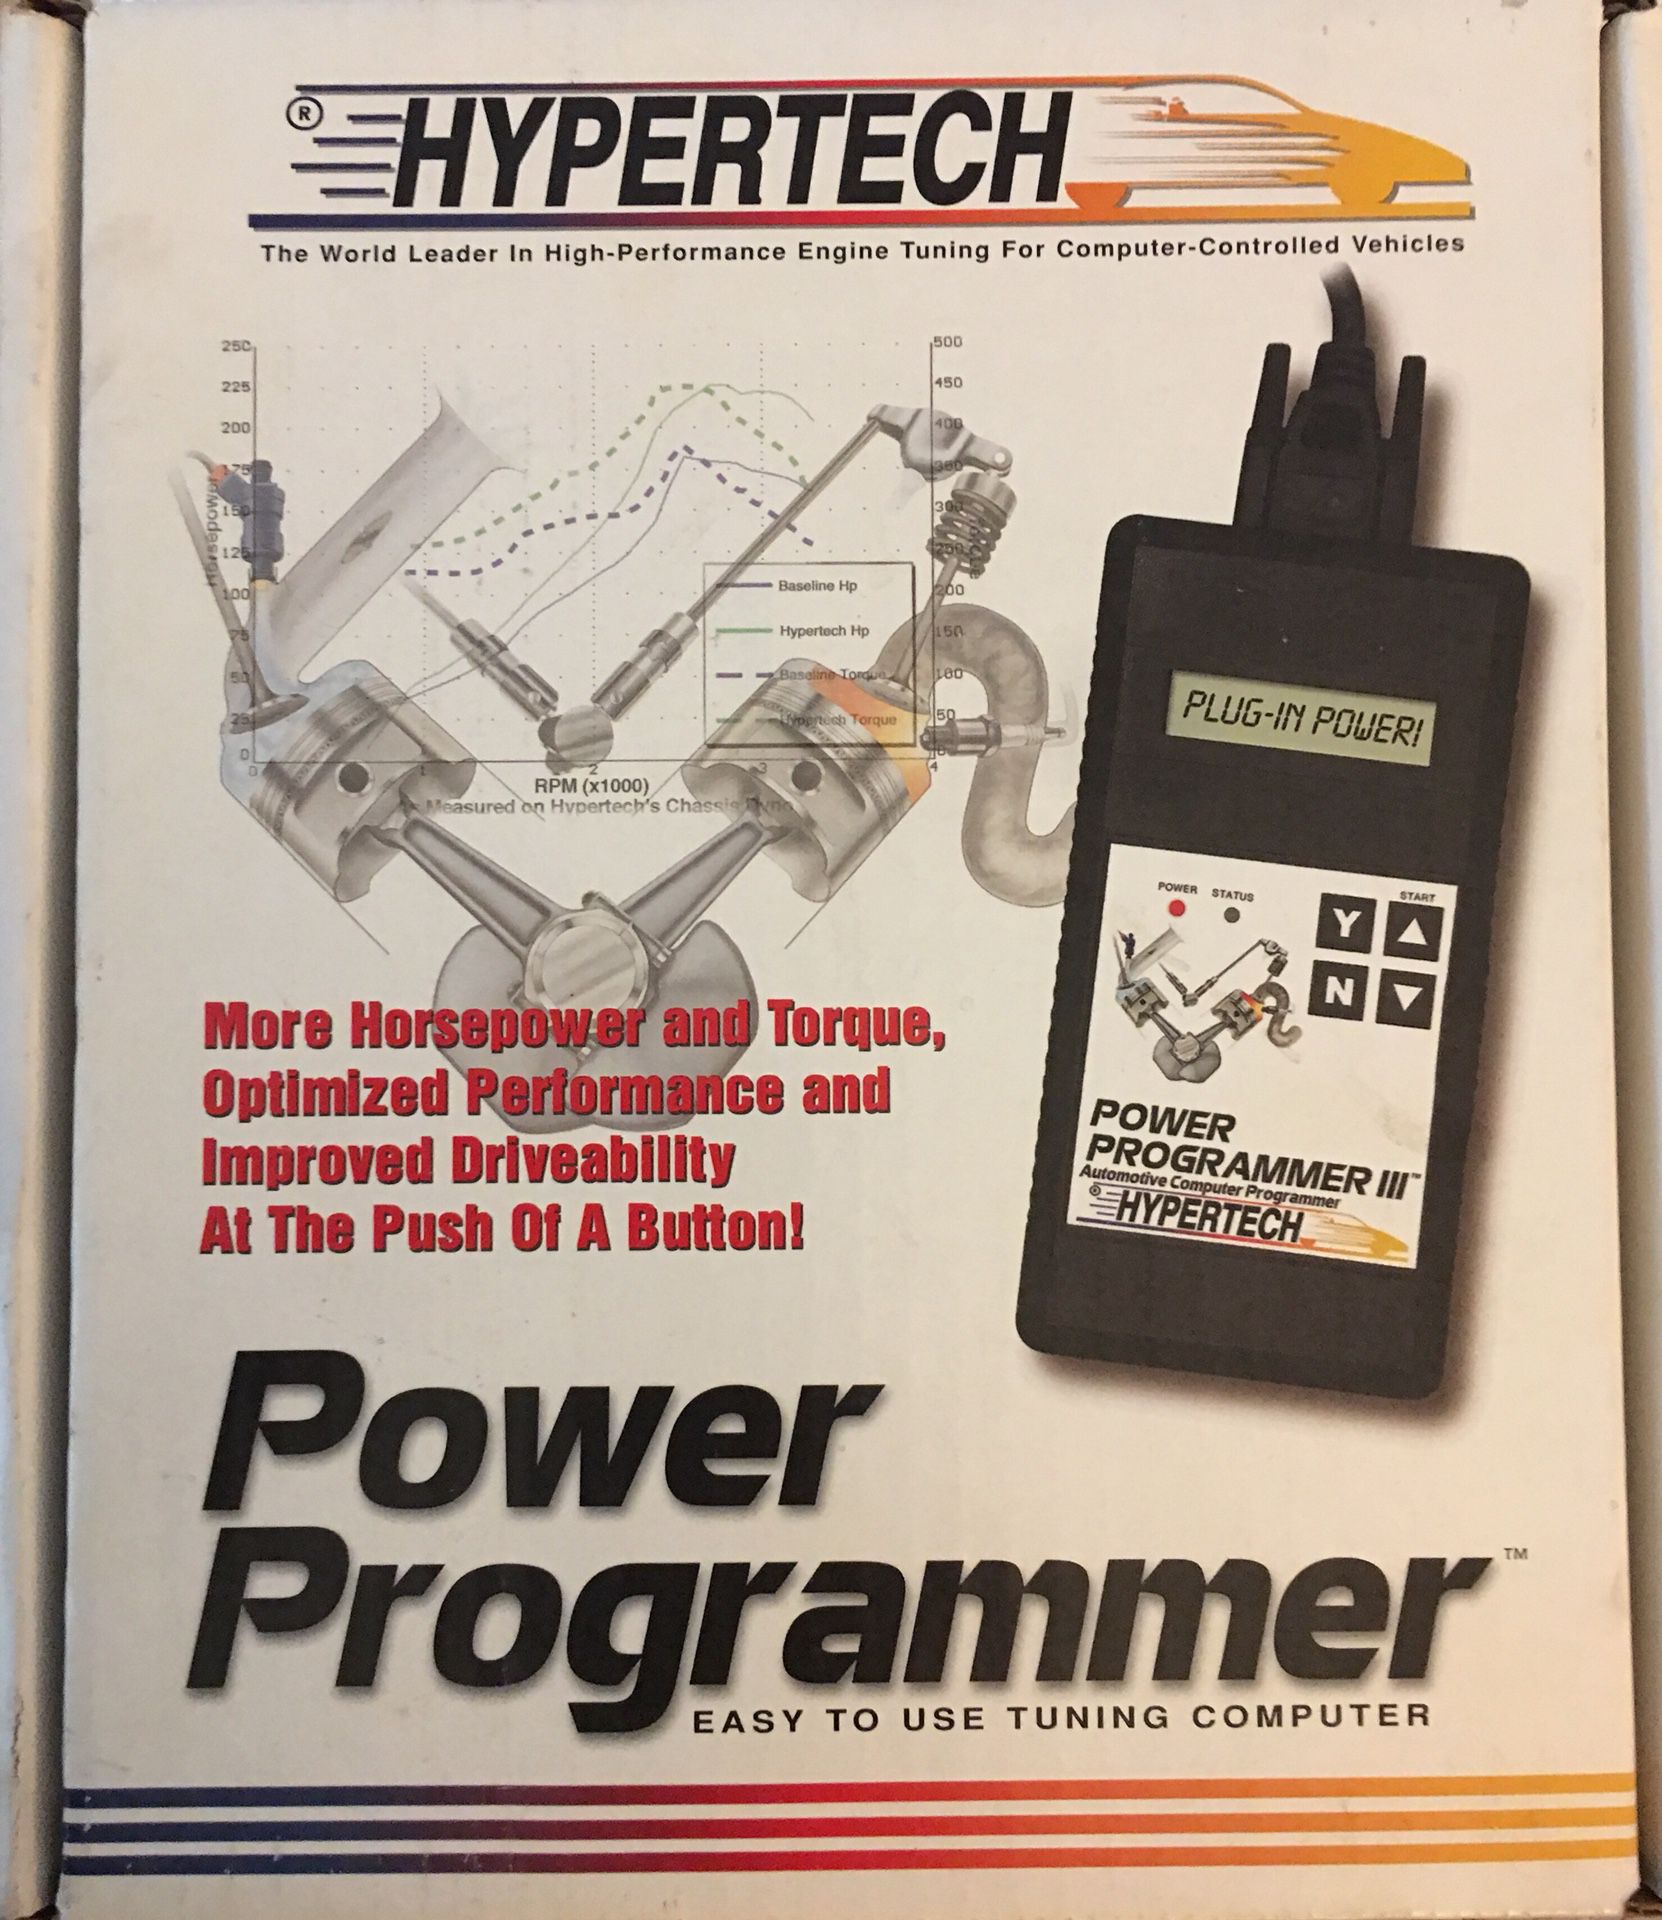 Hypertech Programmer III for 1999 Dodge Truck/SUV with 5.2L or 5.9L engine (Part #50004)